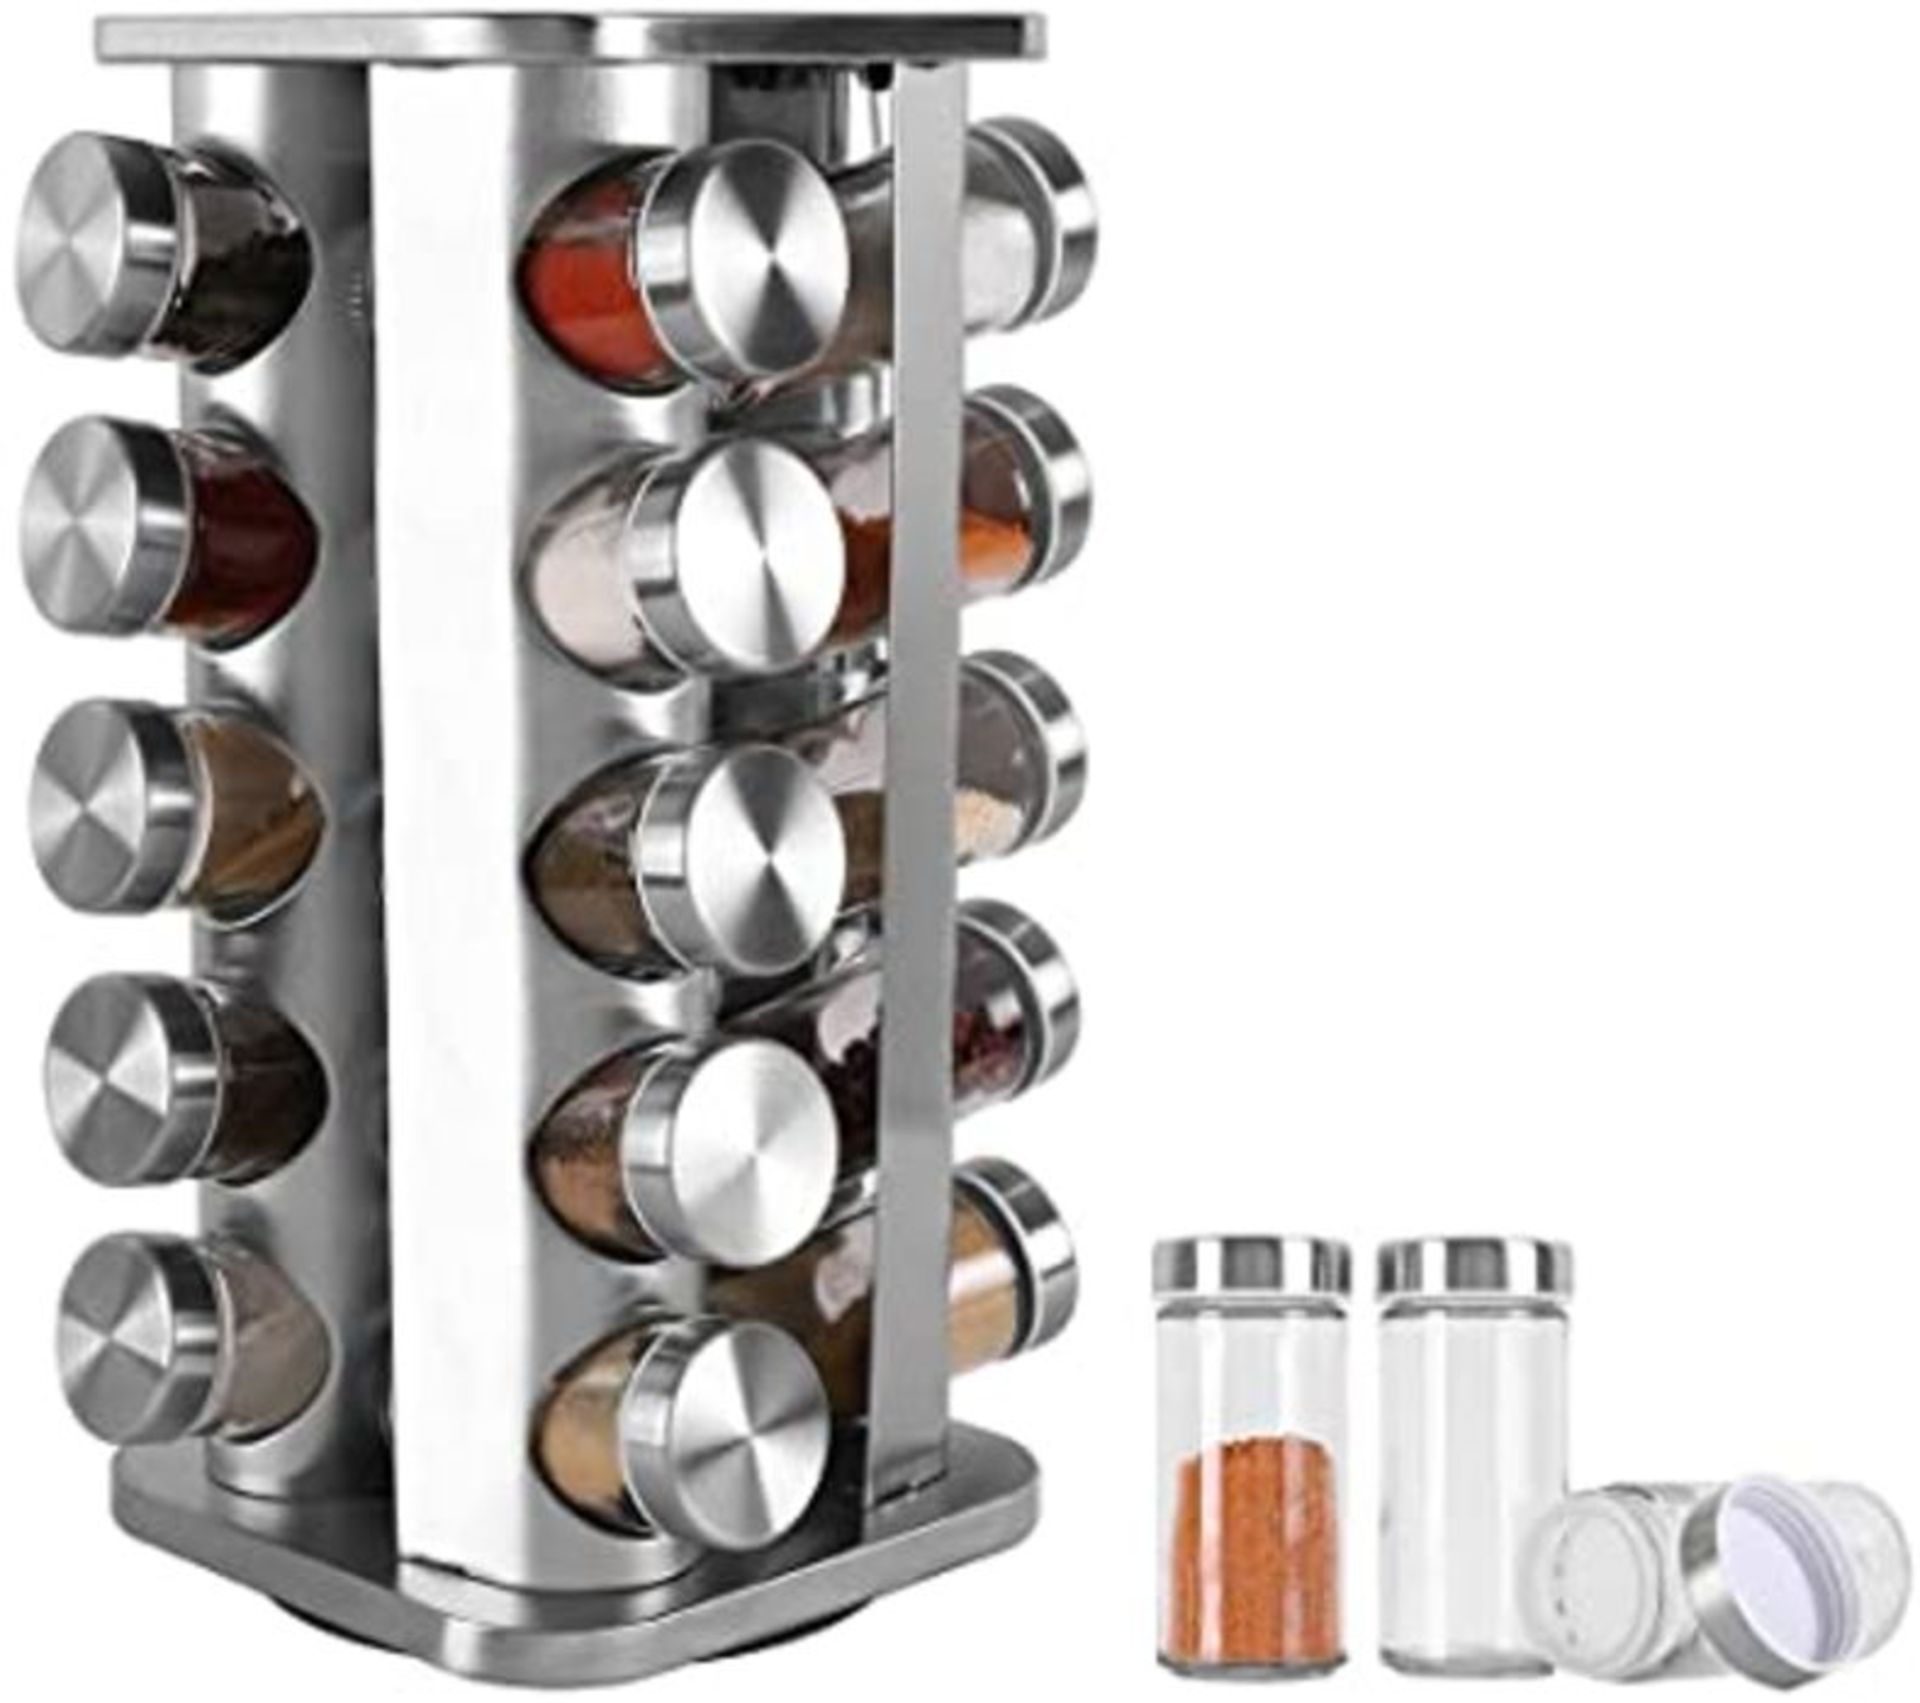 BaoWnylz Square Stainless Steel Spice Rack Rotating Spice Rack has 20 Spice Jars,Which Can be - Image 2 of 2